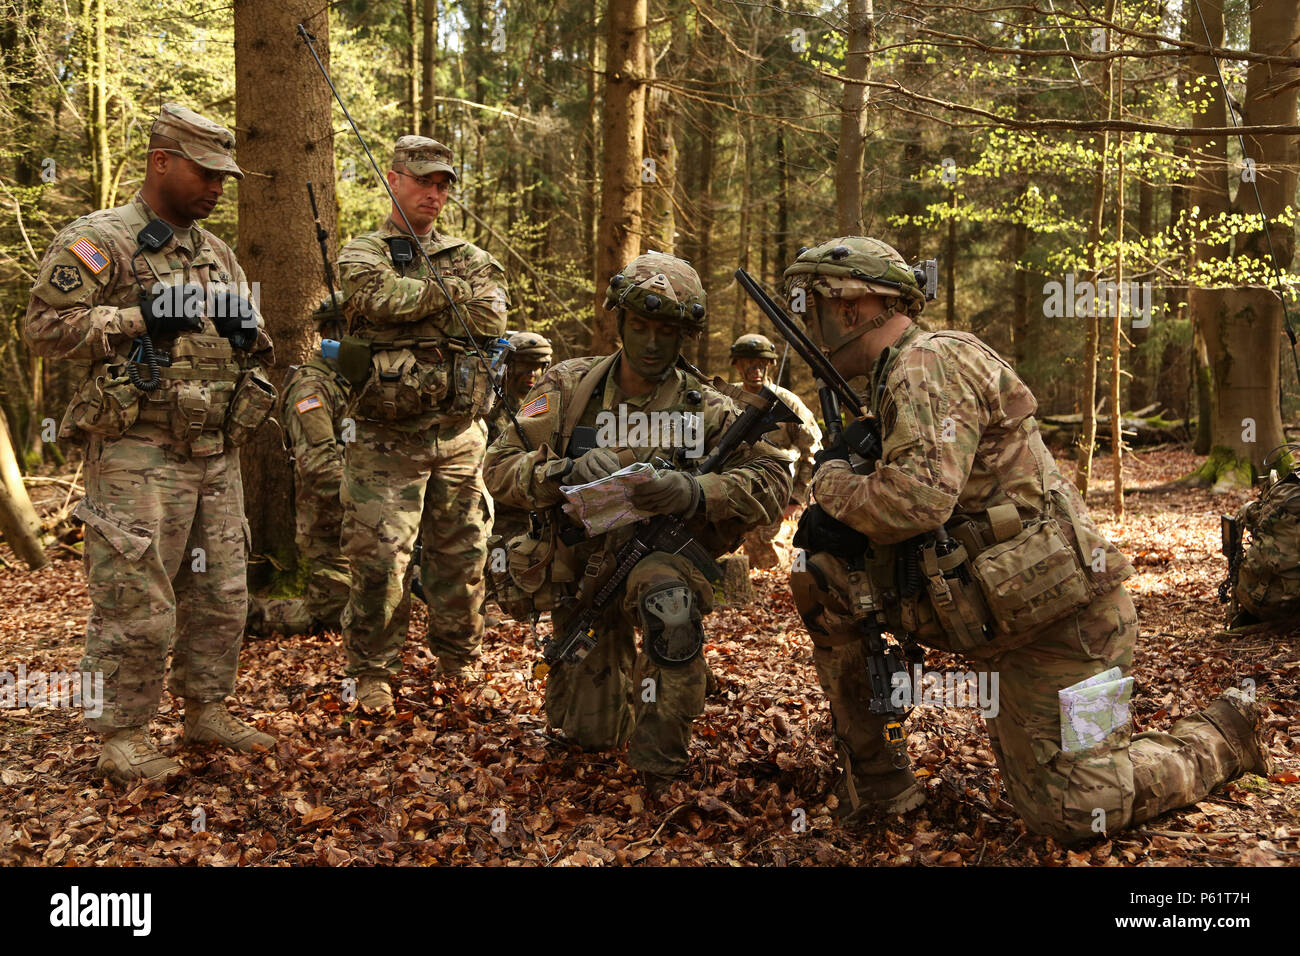 U.S. Soldiers of 1st Battalion, 503rd Infantry Regiment, 173rd Airborne Brigade confirm their location as part of scouting training mission during exercise Saber Junction 16 at the U.S. Army’s Joint Multinational Readiness Center (JMRC) in Hohenfels, Germany, April 14, 2016. Saber Junction 16 is the U.S. Army Europe’s 173rd Airborne Brigade’s combat training center certification exercise, taking place at the JMRC in Hohenfels, Germany, Mar. 31-Apr. 24, 2016.  The exercise is designed to evaluate the readiness of the Army’s Europe-based combat brigades to conduct unified land operations and pro Stock Photo